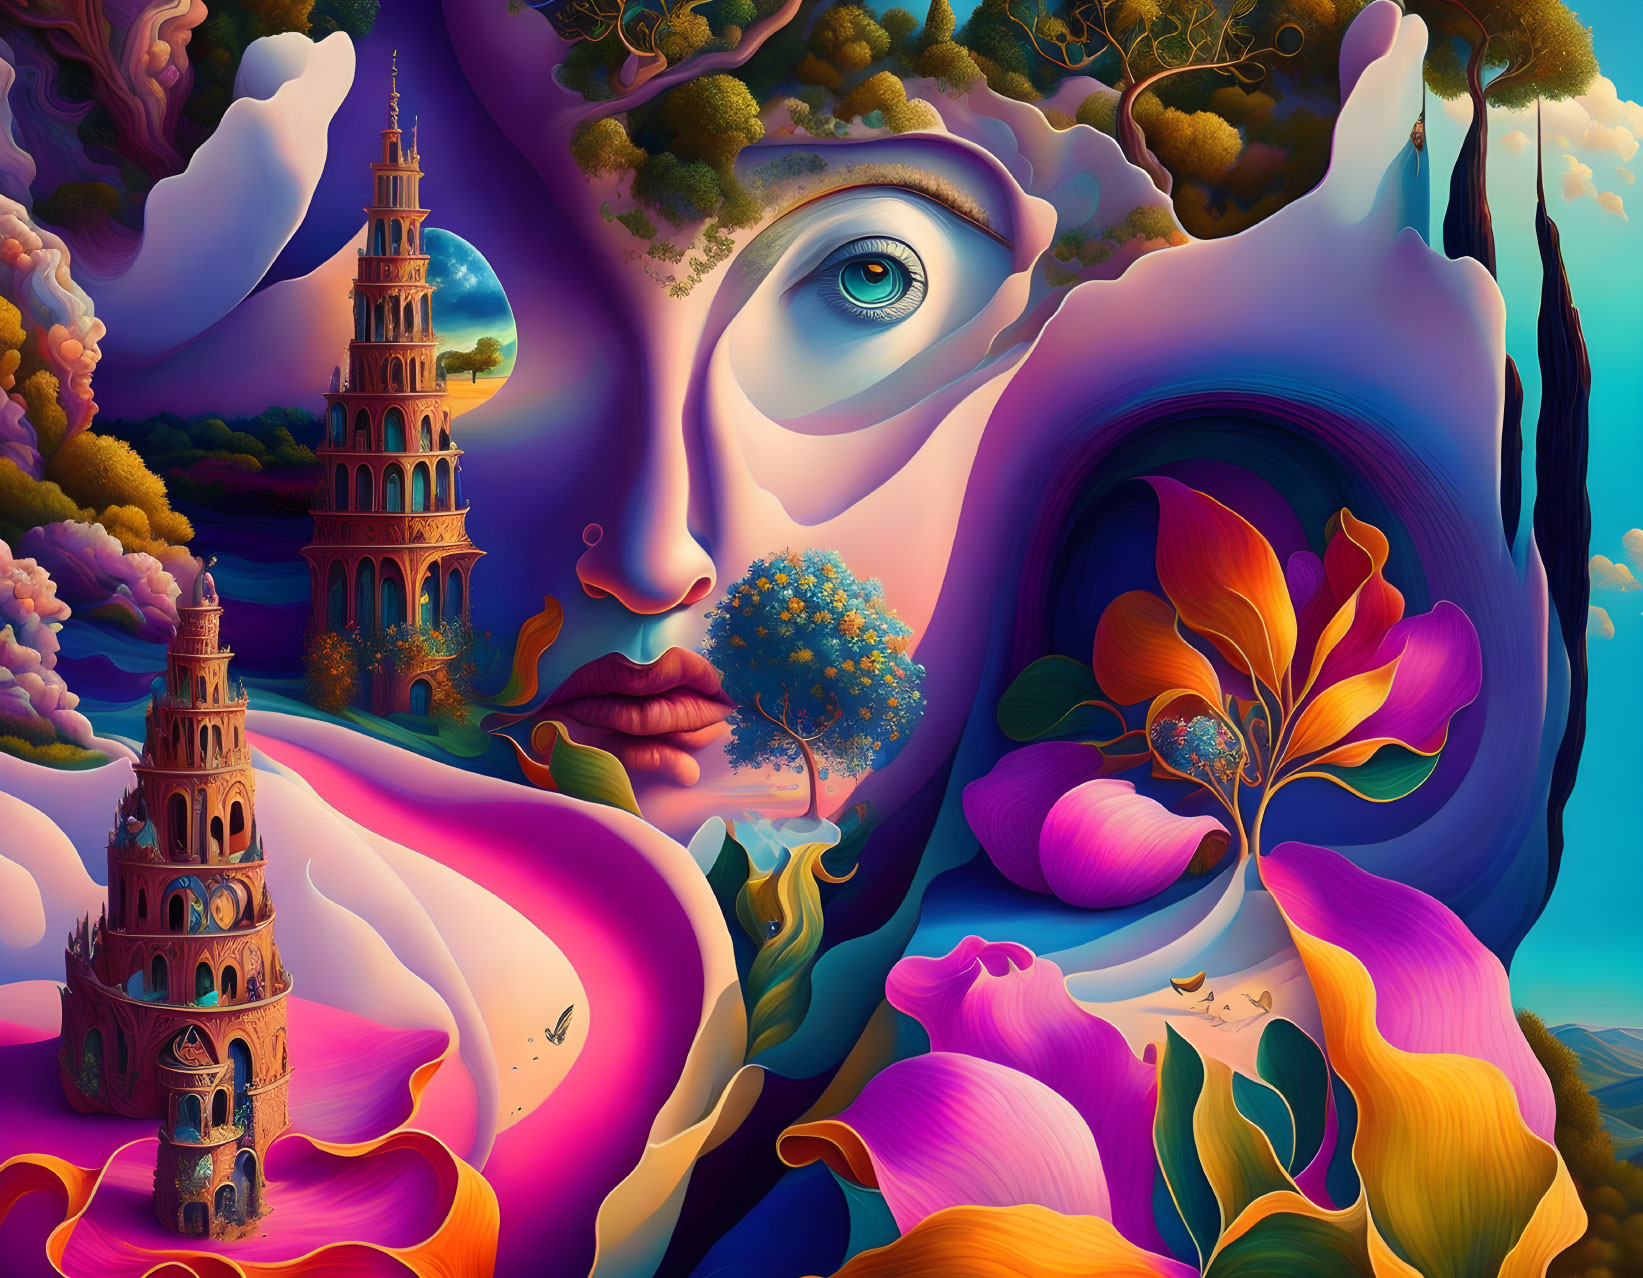 Surrealist landscape with nature and facial features blending in vivid colors